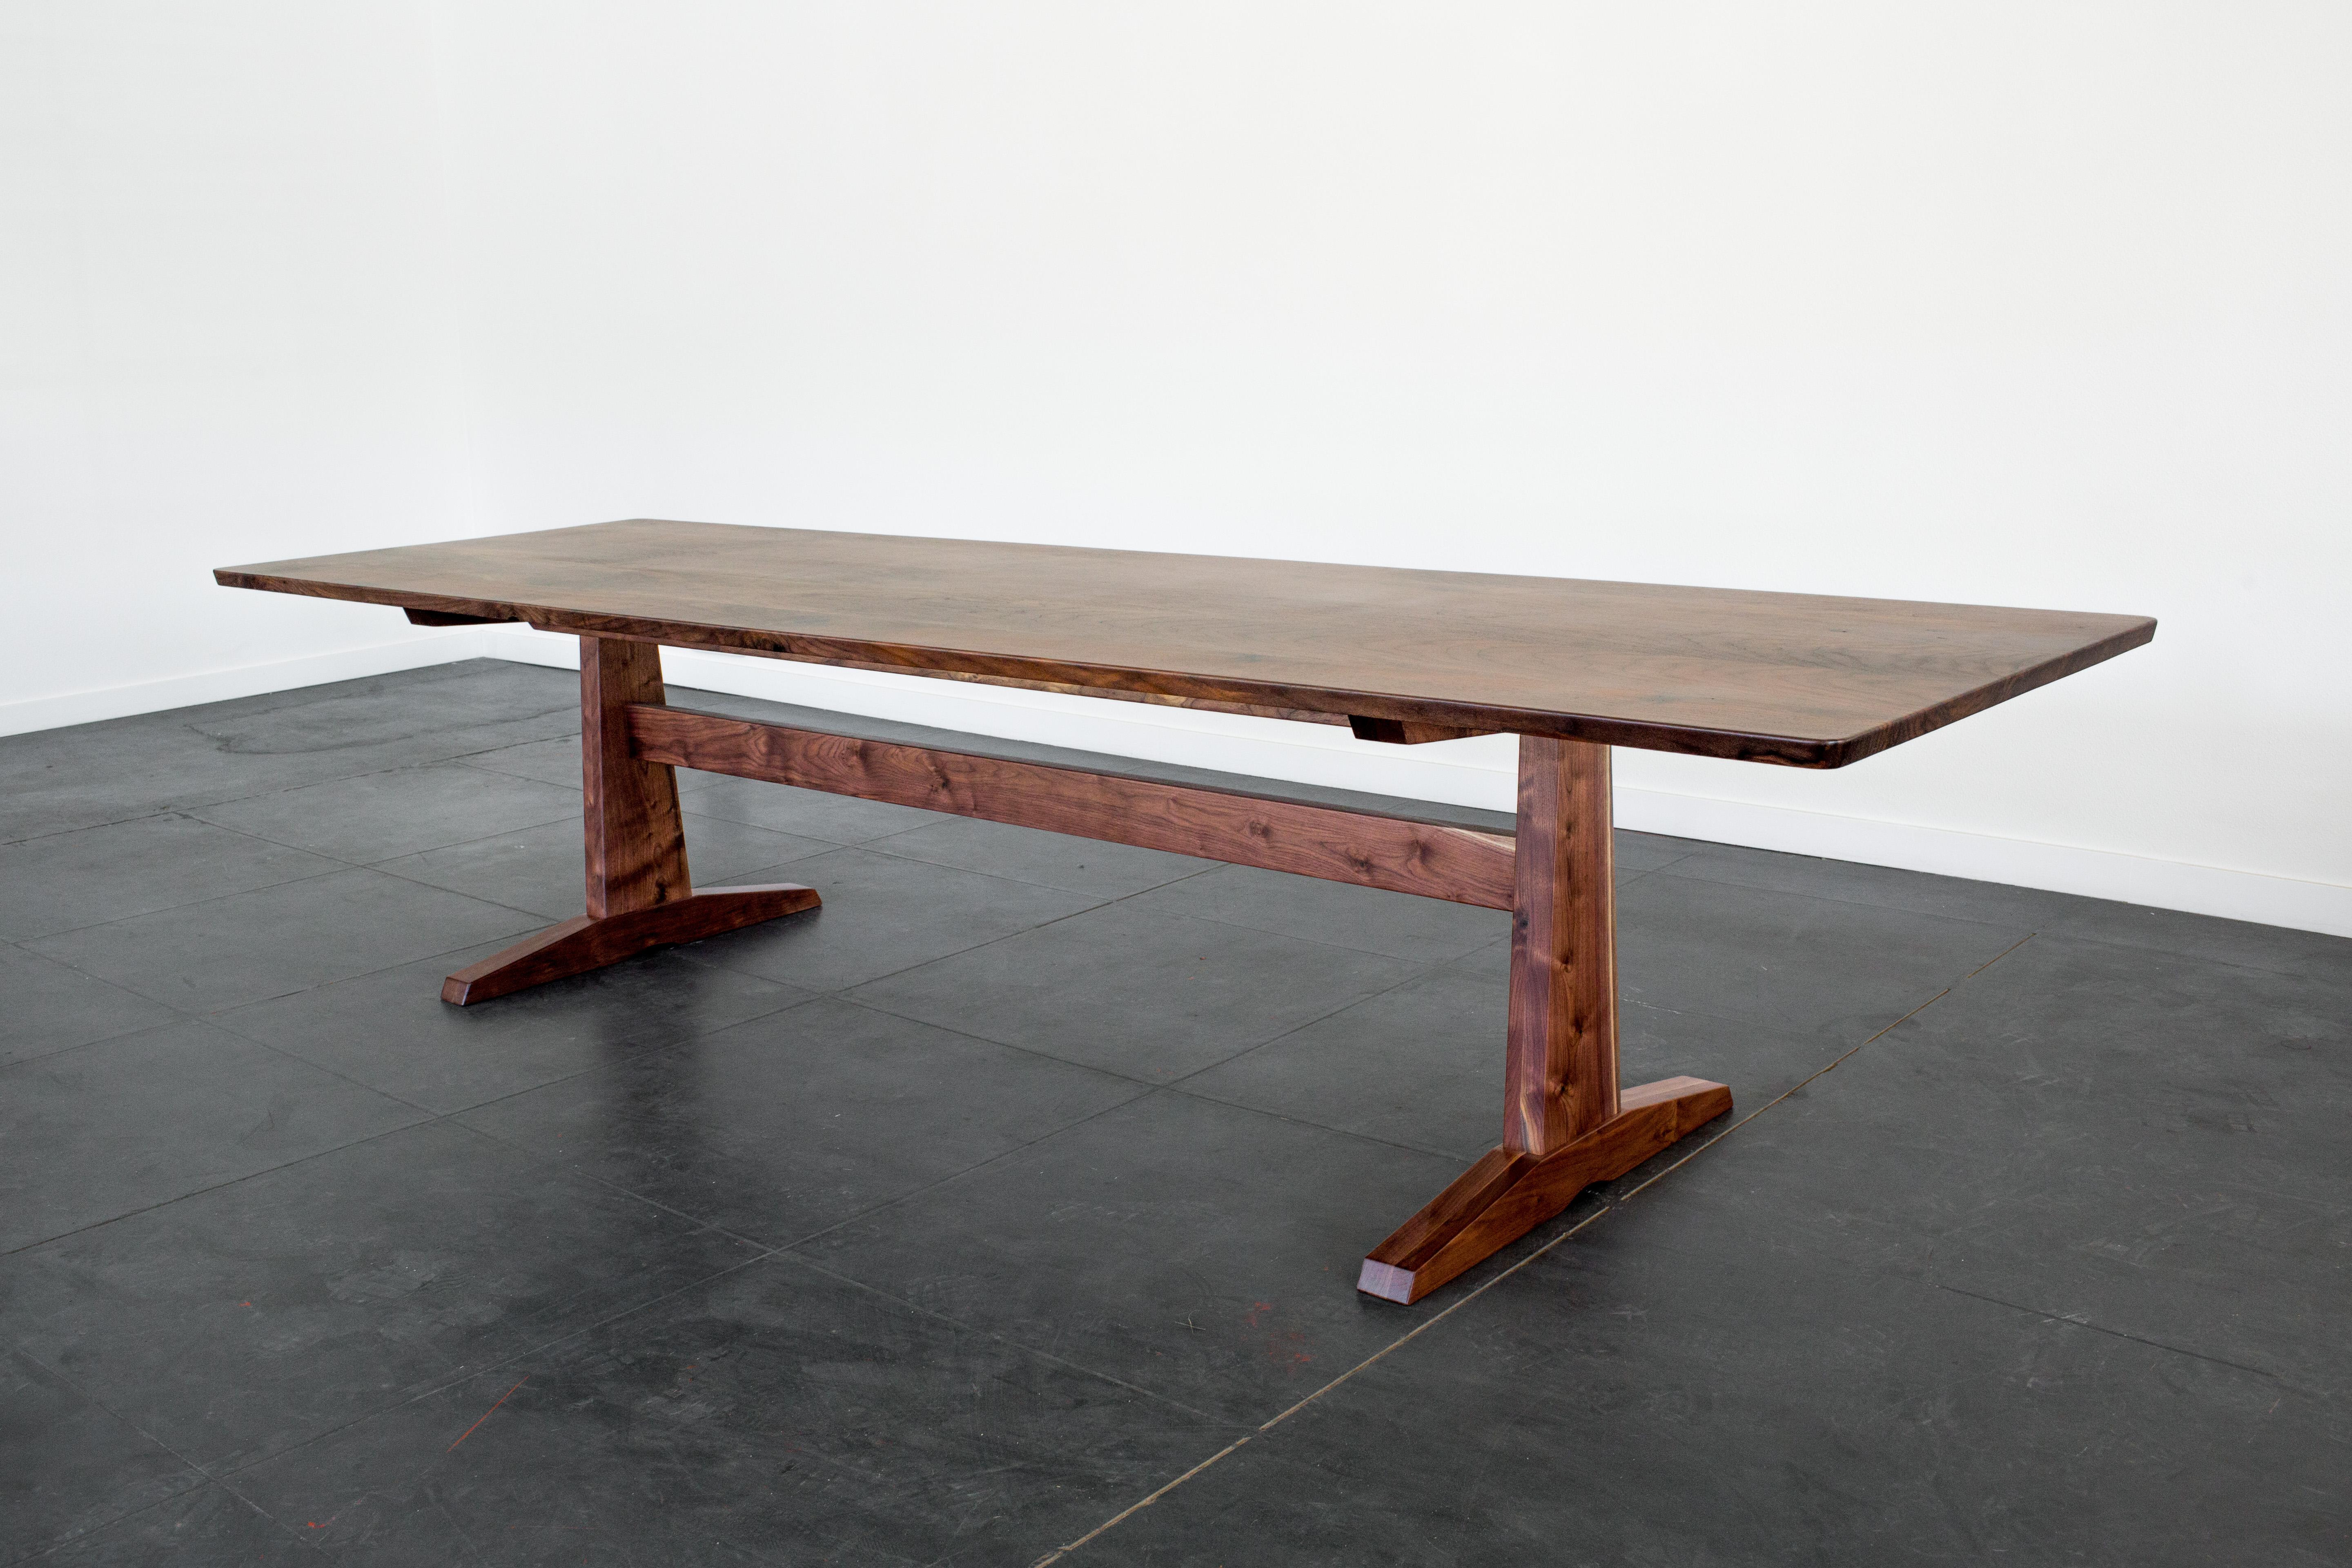 Purpose and design align in our Columbia Trestle Table. A solid trestle base is the grounding feature in this beautifully crafted modern take on a traditional form. Sleek with a strong profile, this table will be a stately presence in your dining or